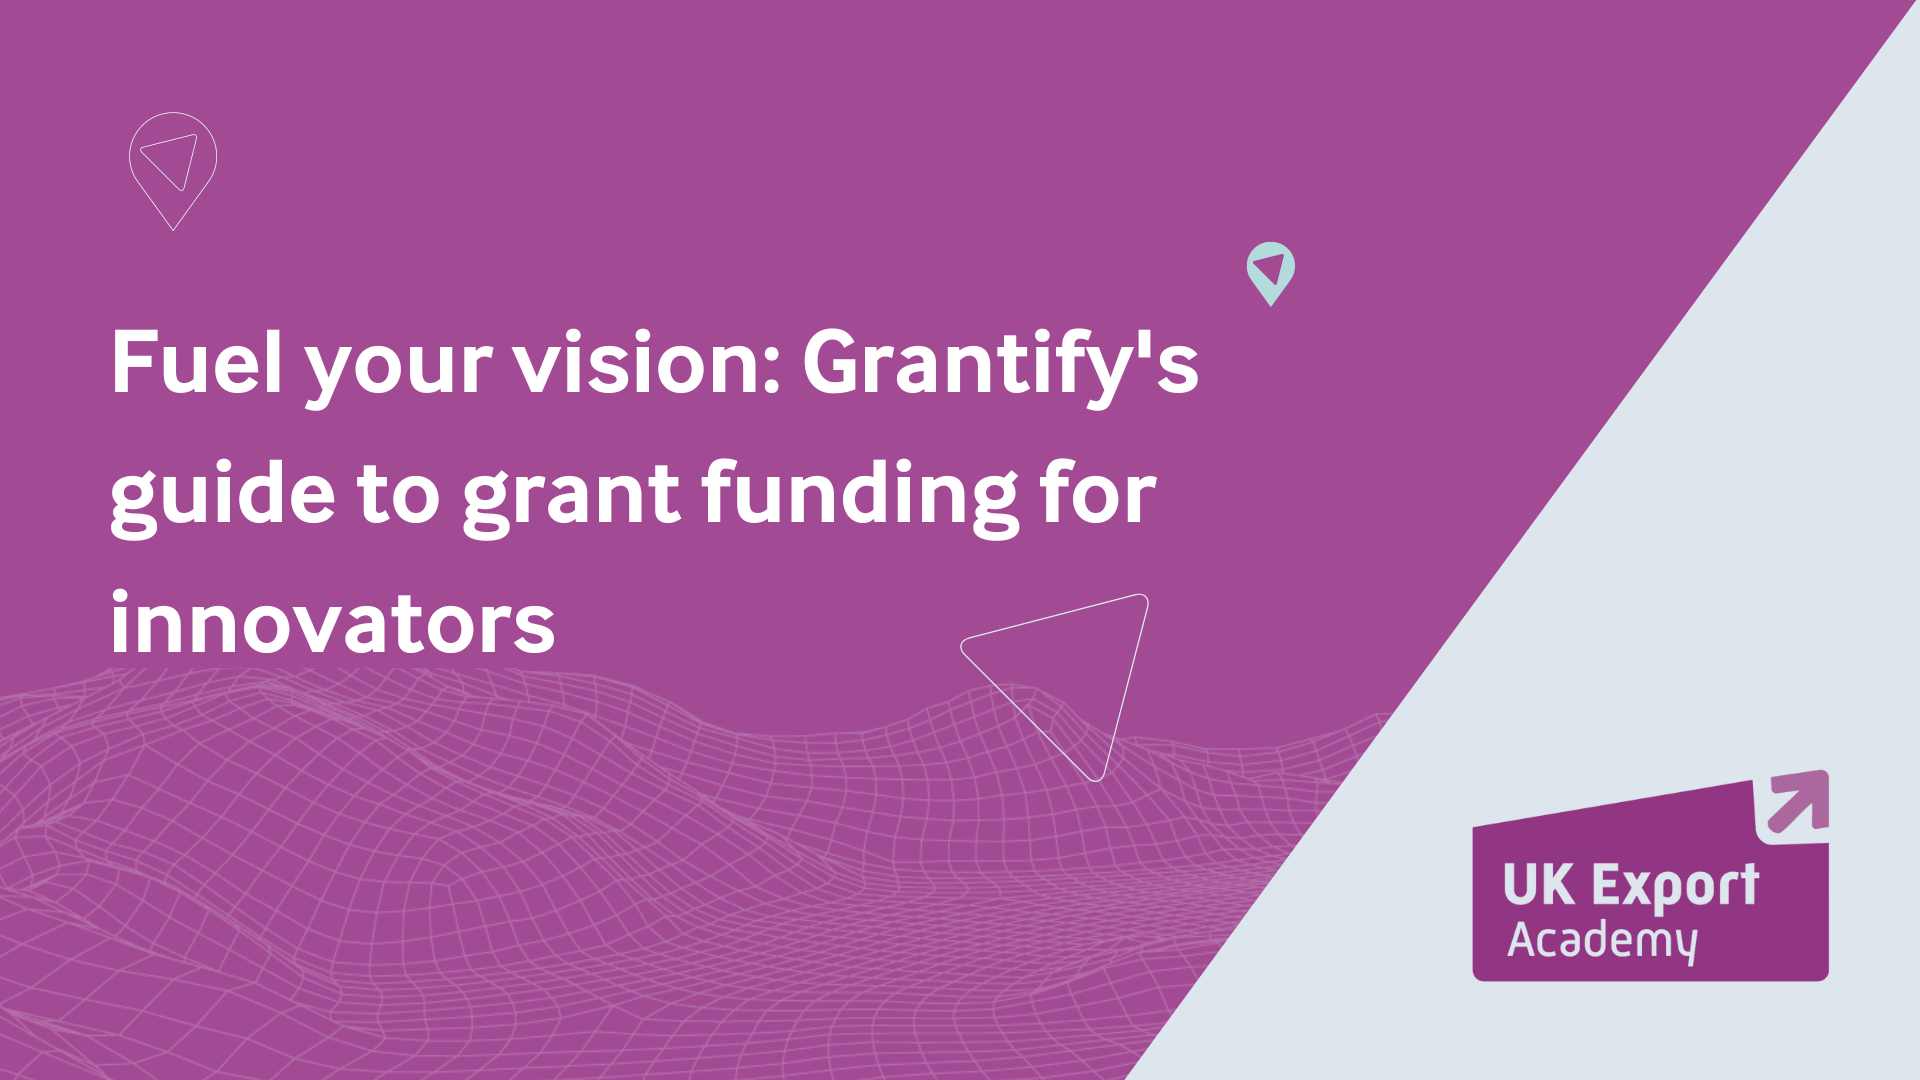 Fuel your vision: Grantify's guide to grant funding for innovators